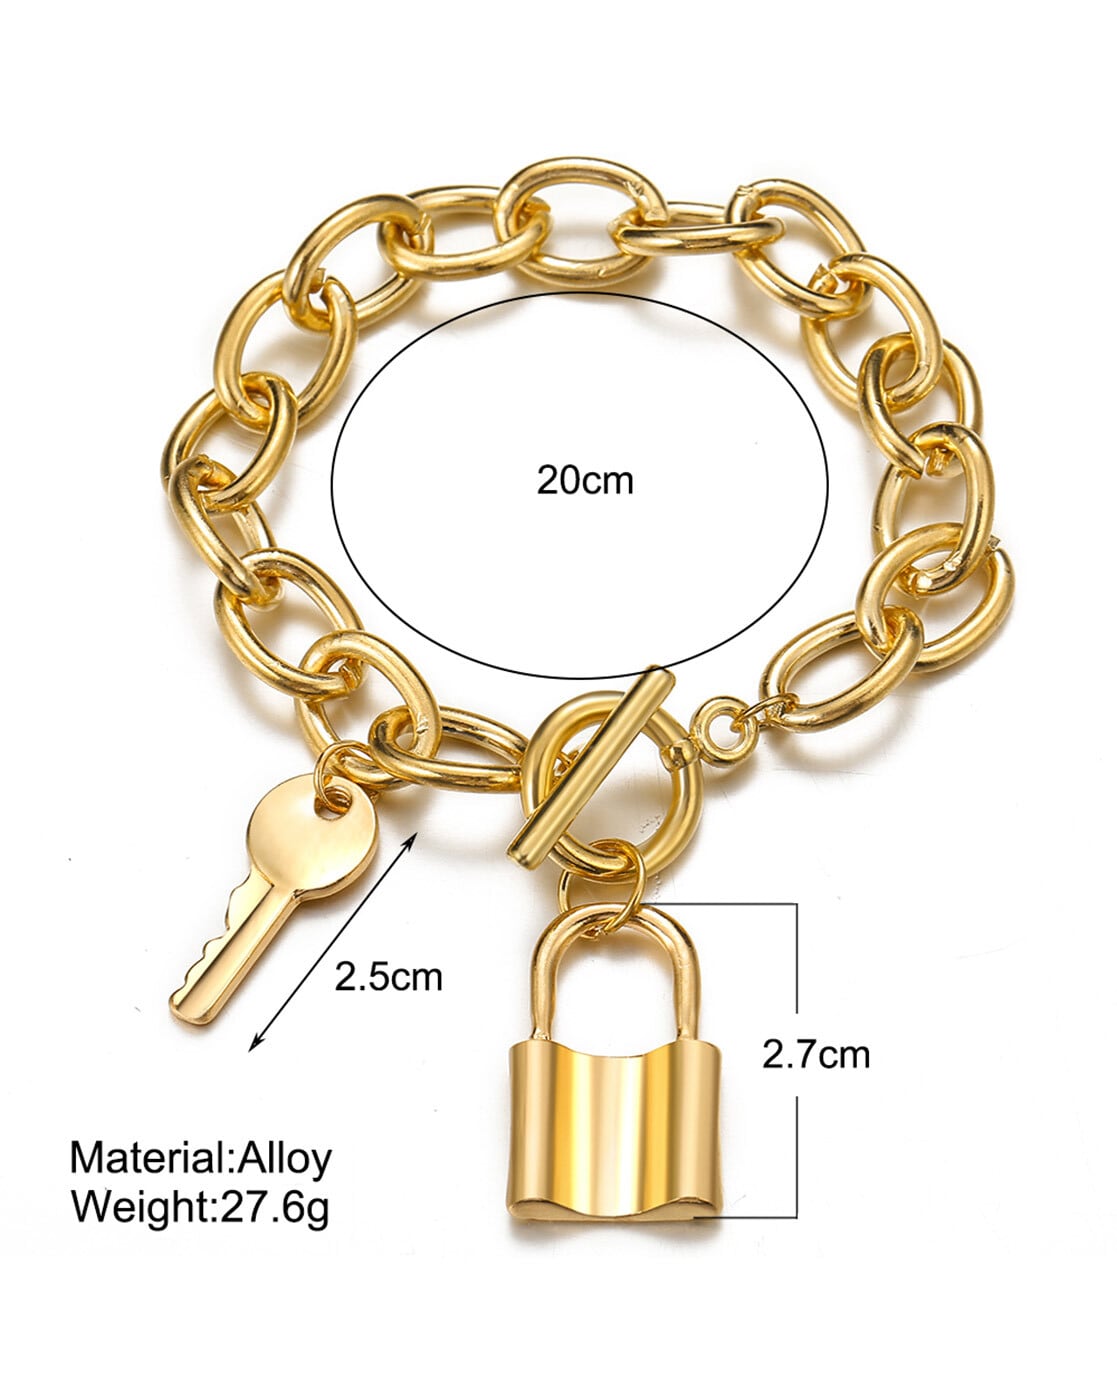 Gold plated link chain bracelet with heart shape lock -